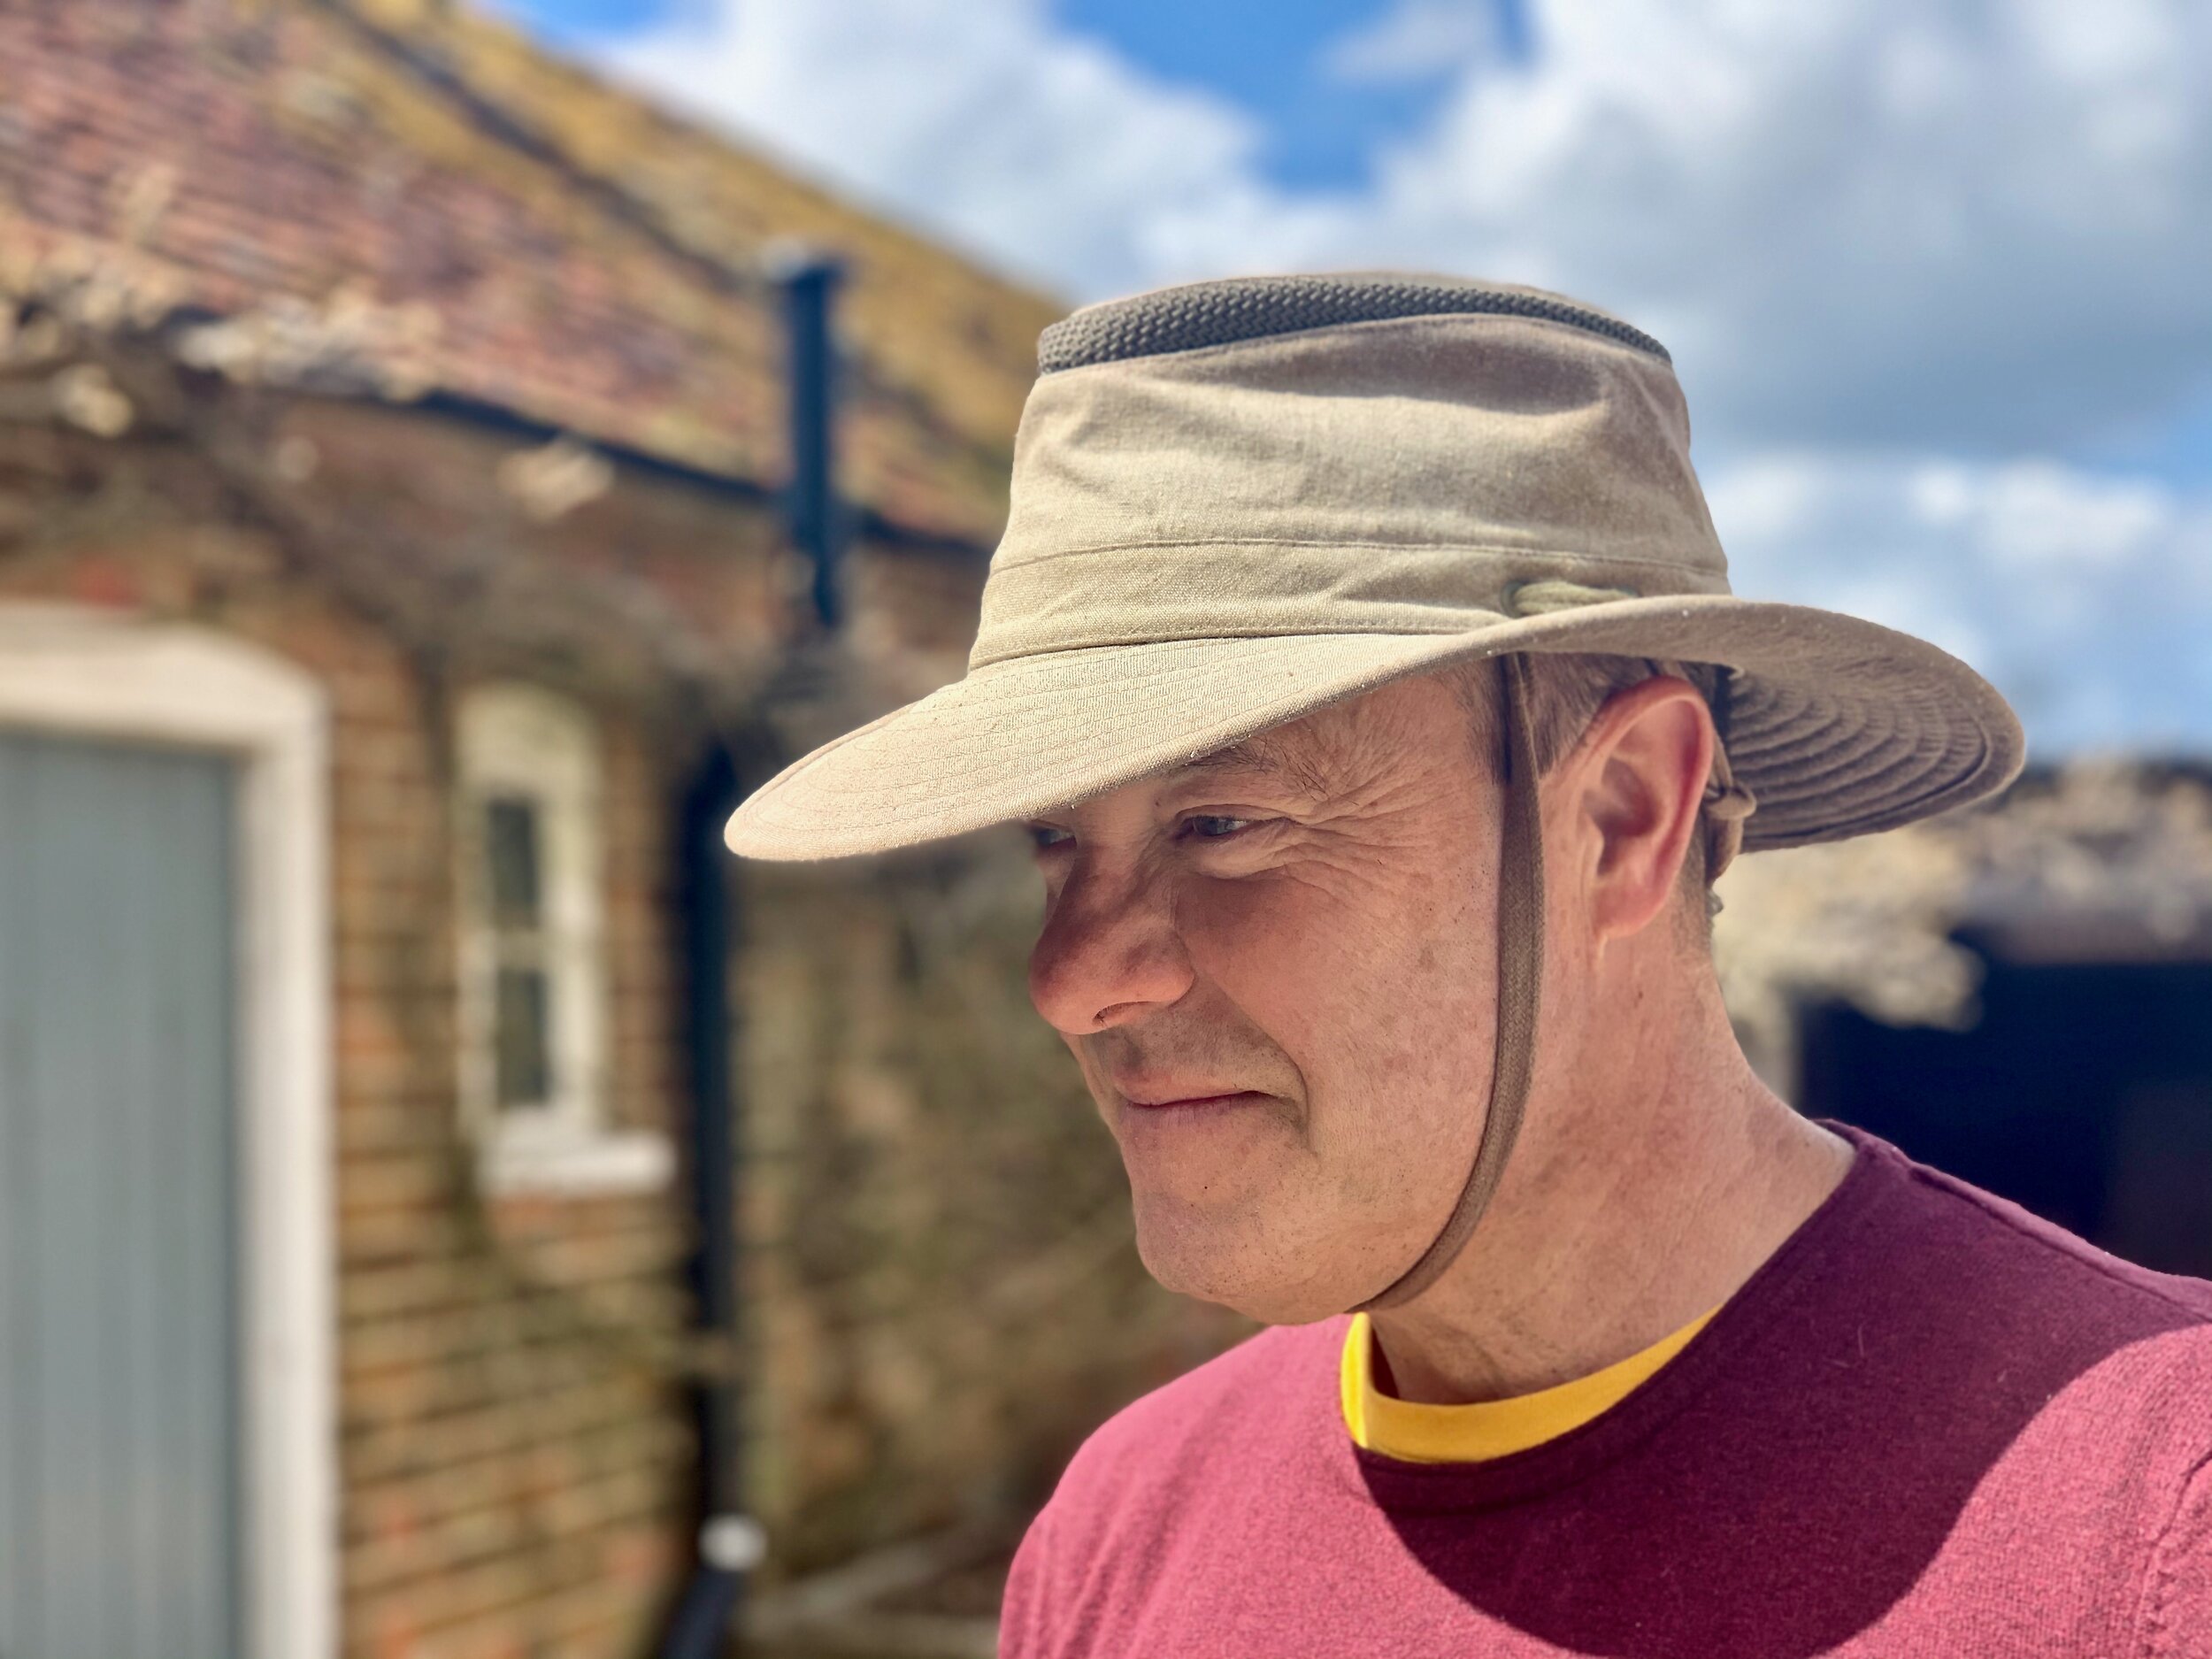 Tilley Mashup Airflo Hat Review | Euro Travel Coach